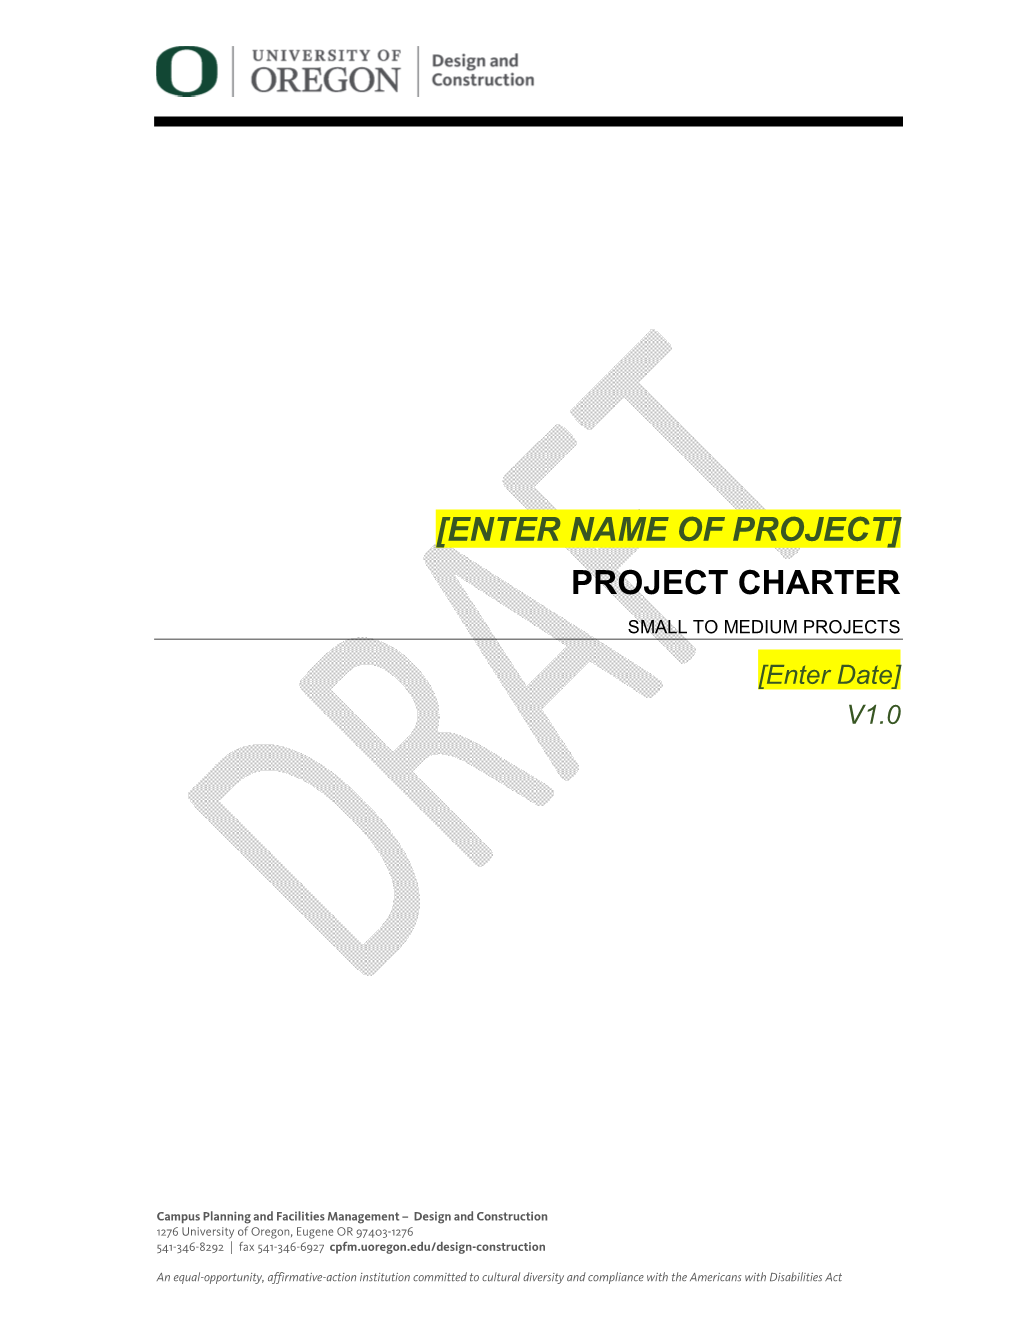 [ENTER NAME of PROJECT] PROJECT CHARTER SMALL to MEDIUM PROJECTS [Enter Date] V1.0